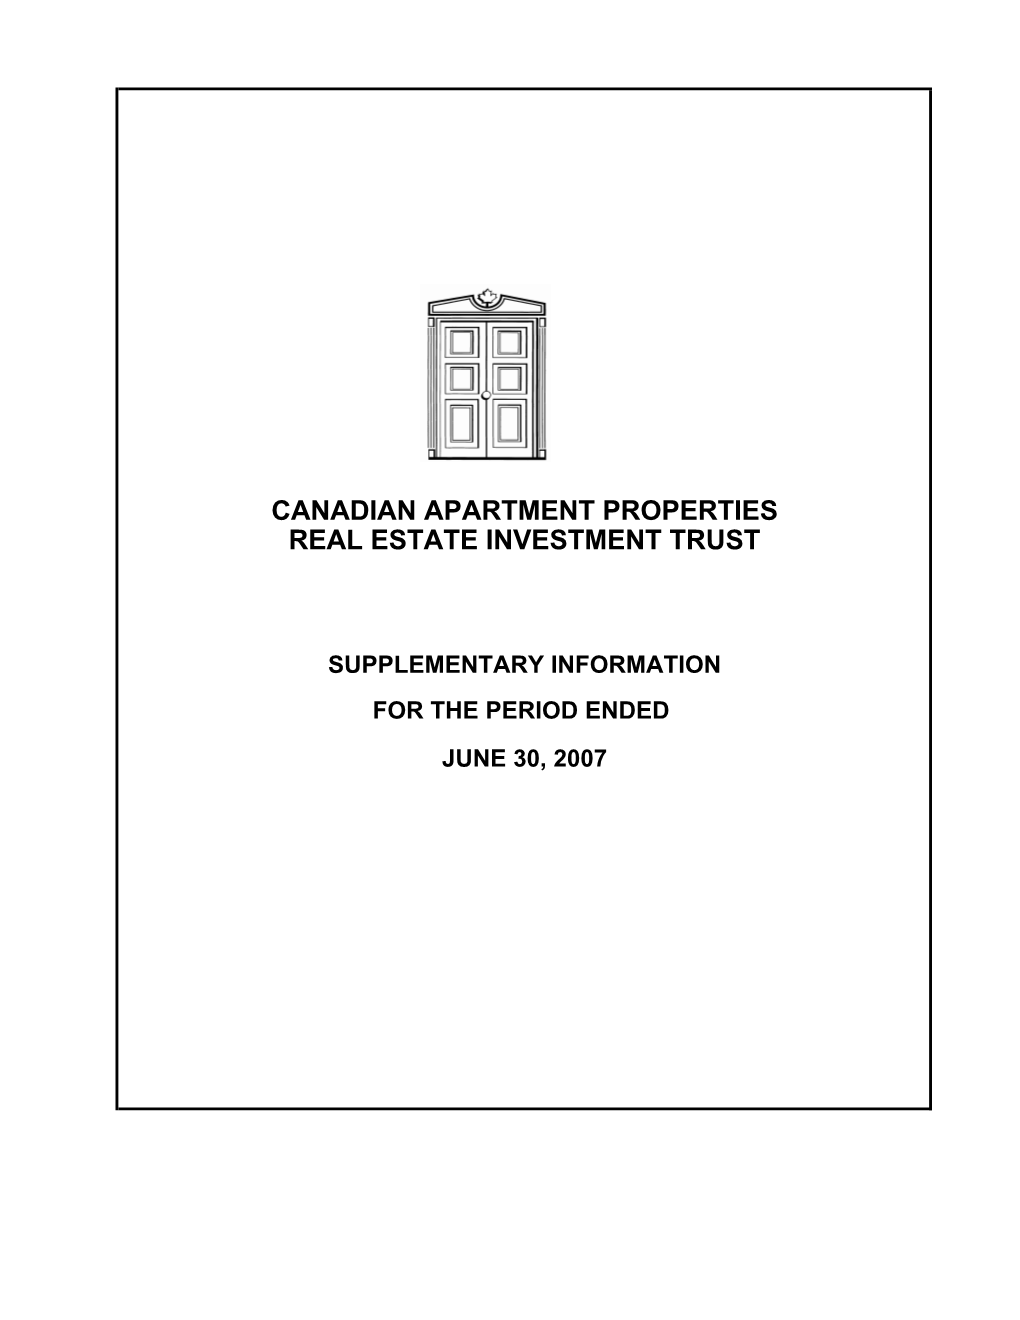 Canadian Apartment Properties Real Estate Investment Trust